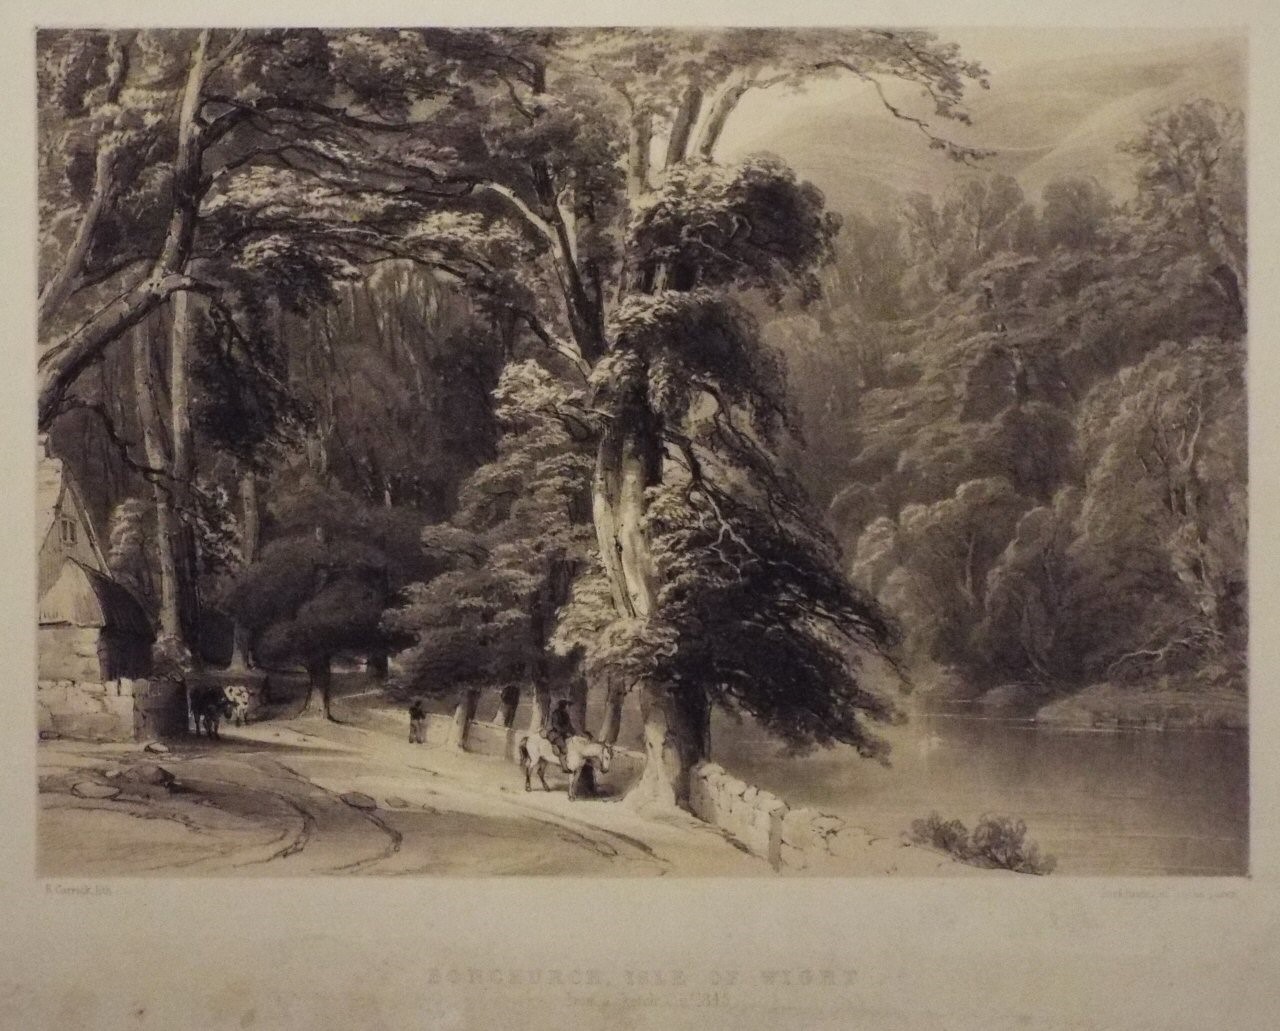 Lithograph - Bonchurch, Isle of Wight from a Sketch. - Carrick